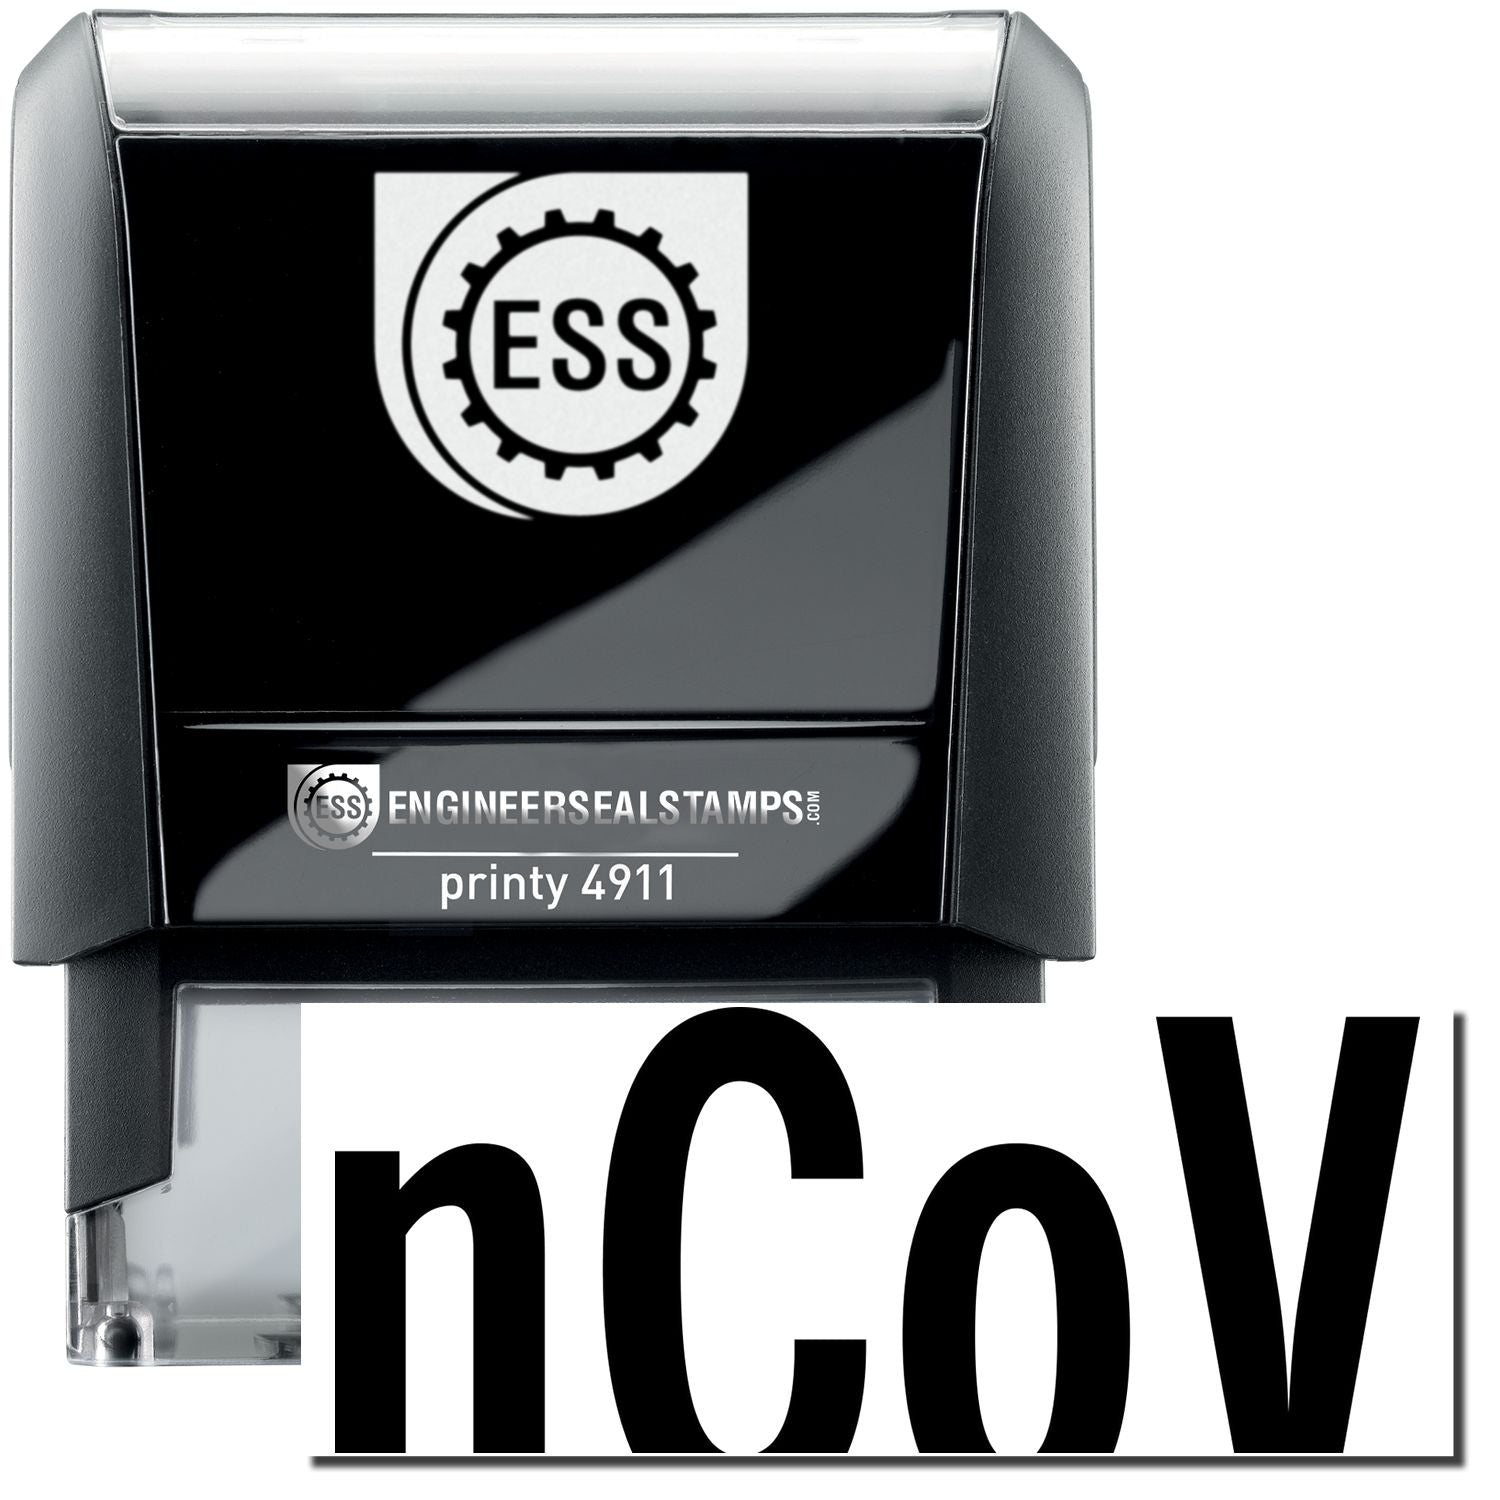 A self-inking stamp with a stamped image showing how the text "nCoV" is displayed after stamping.